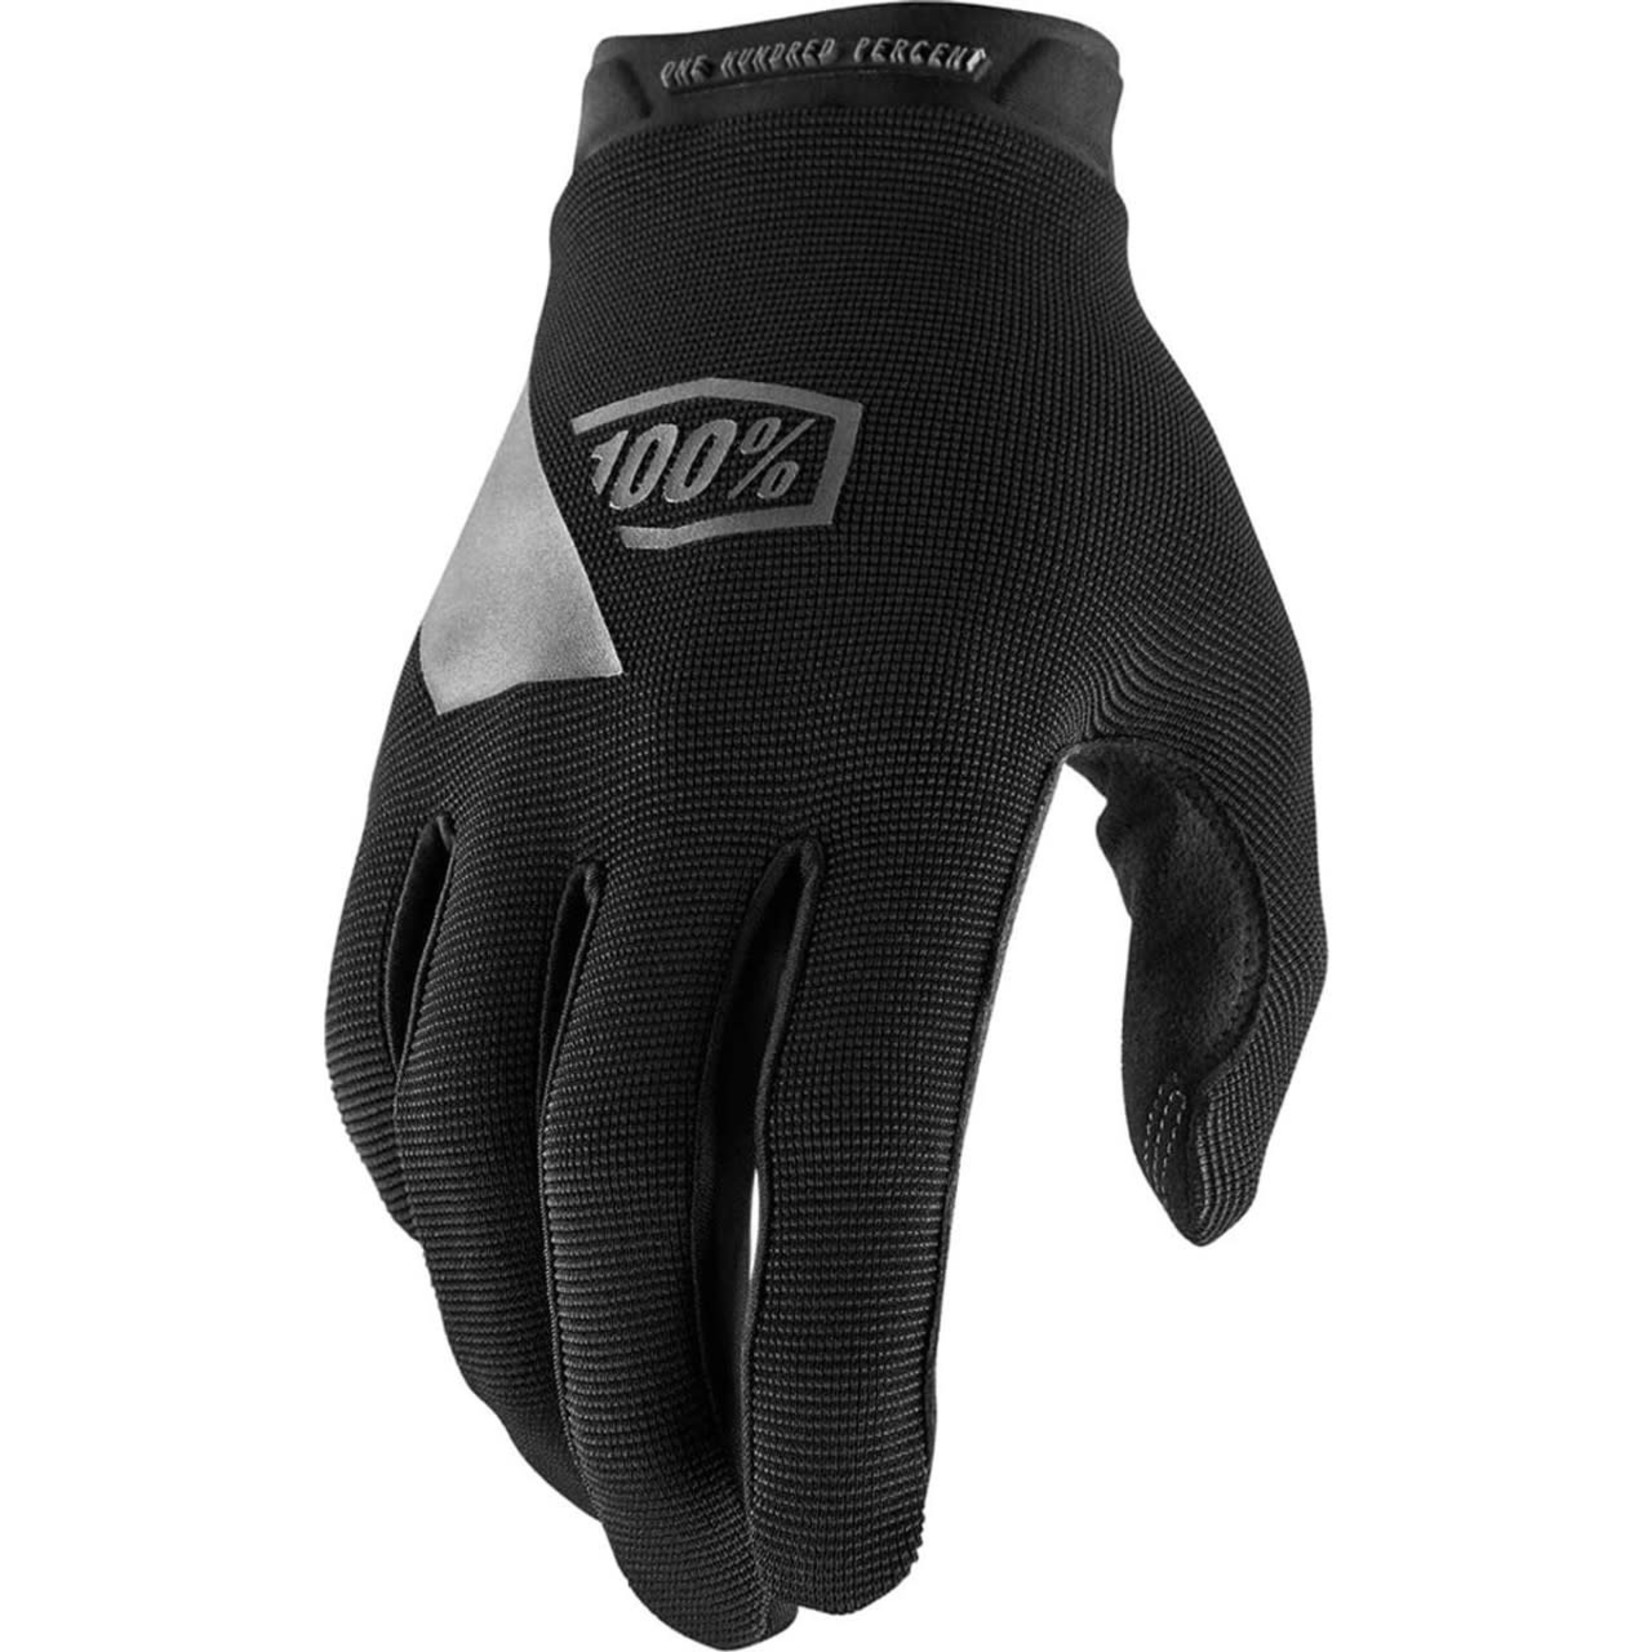 100% 100%: Gloves, Ridecamp, Black - Small Womens